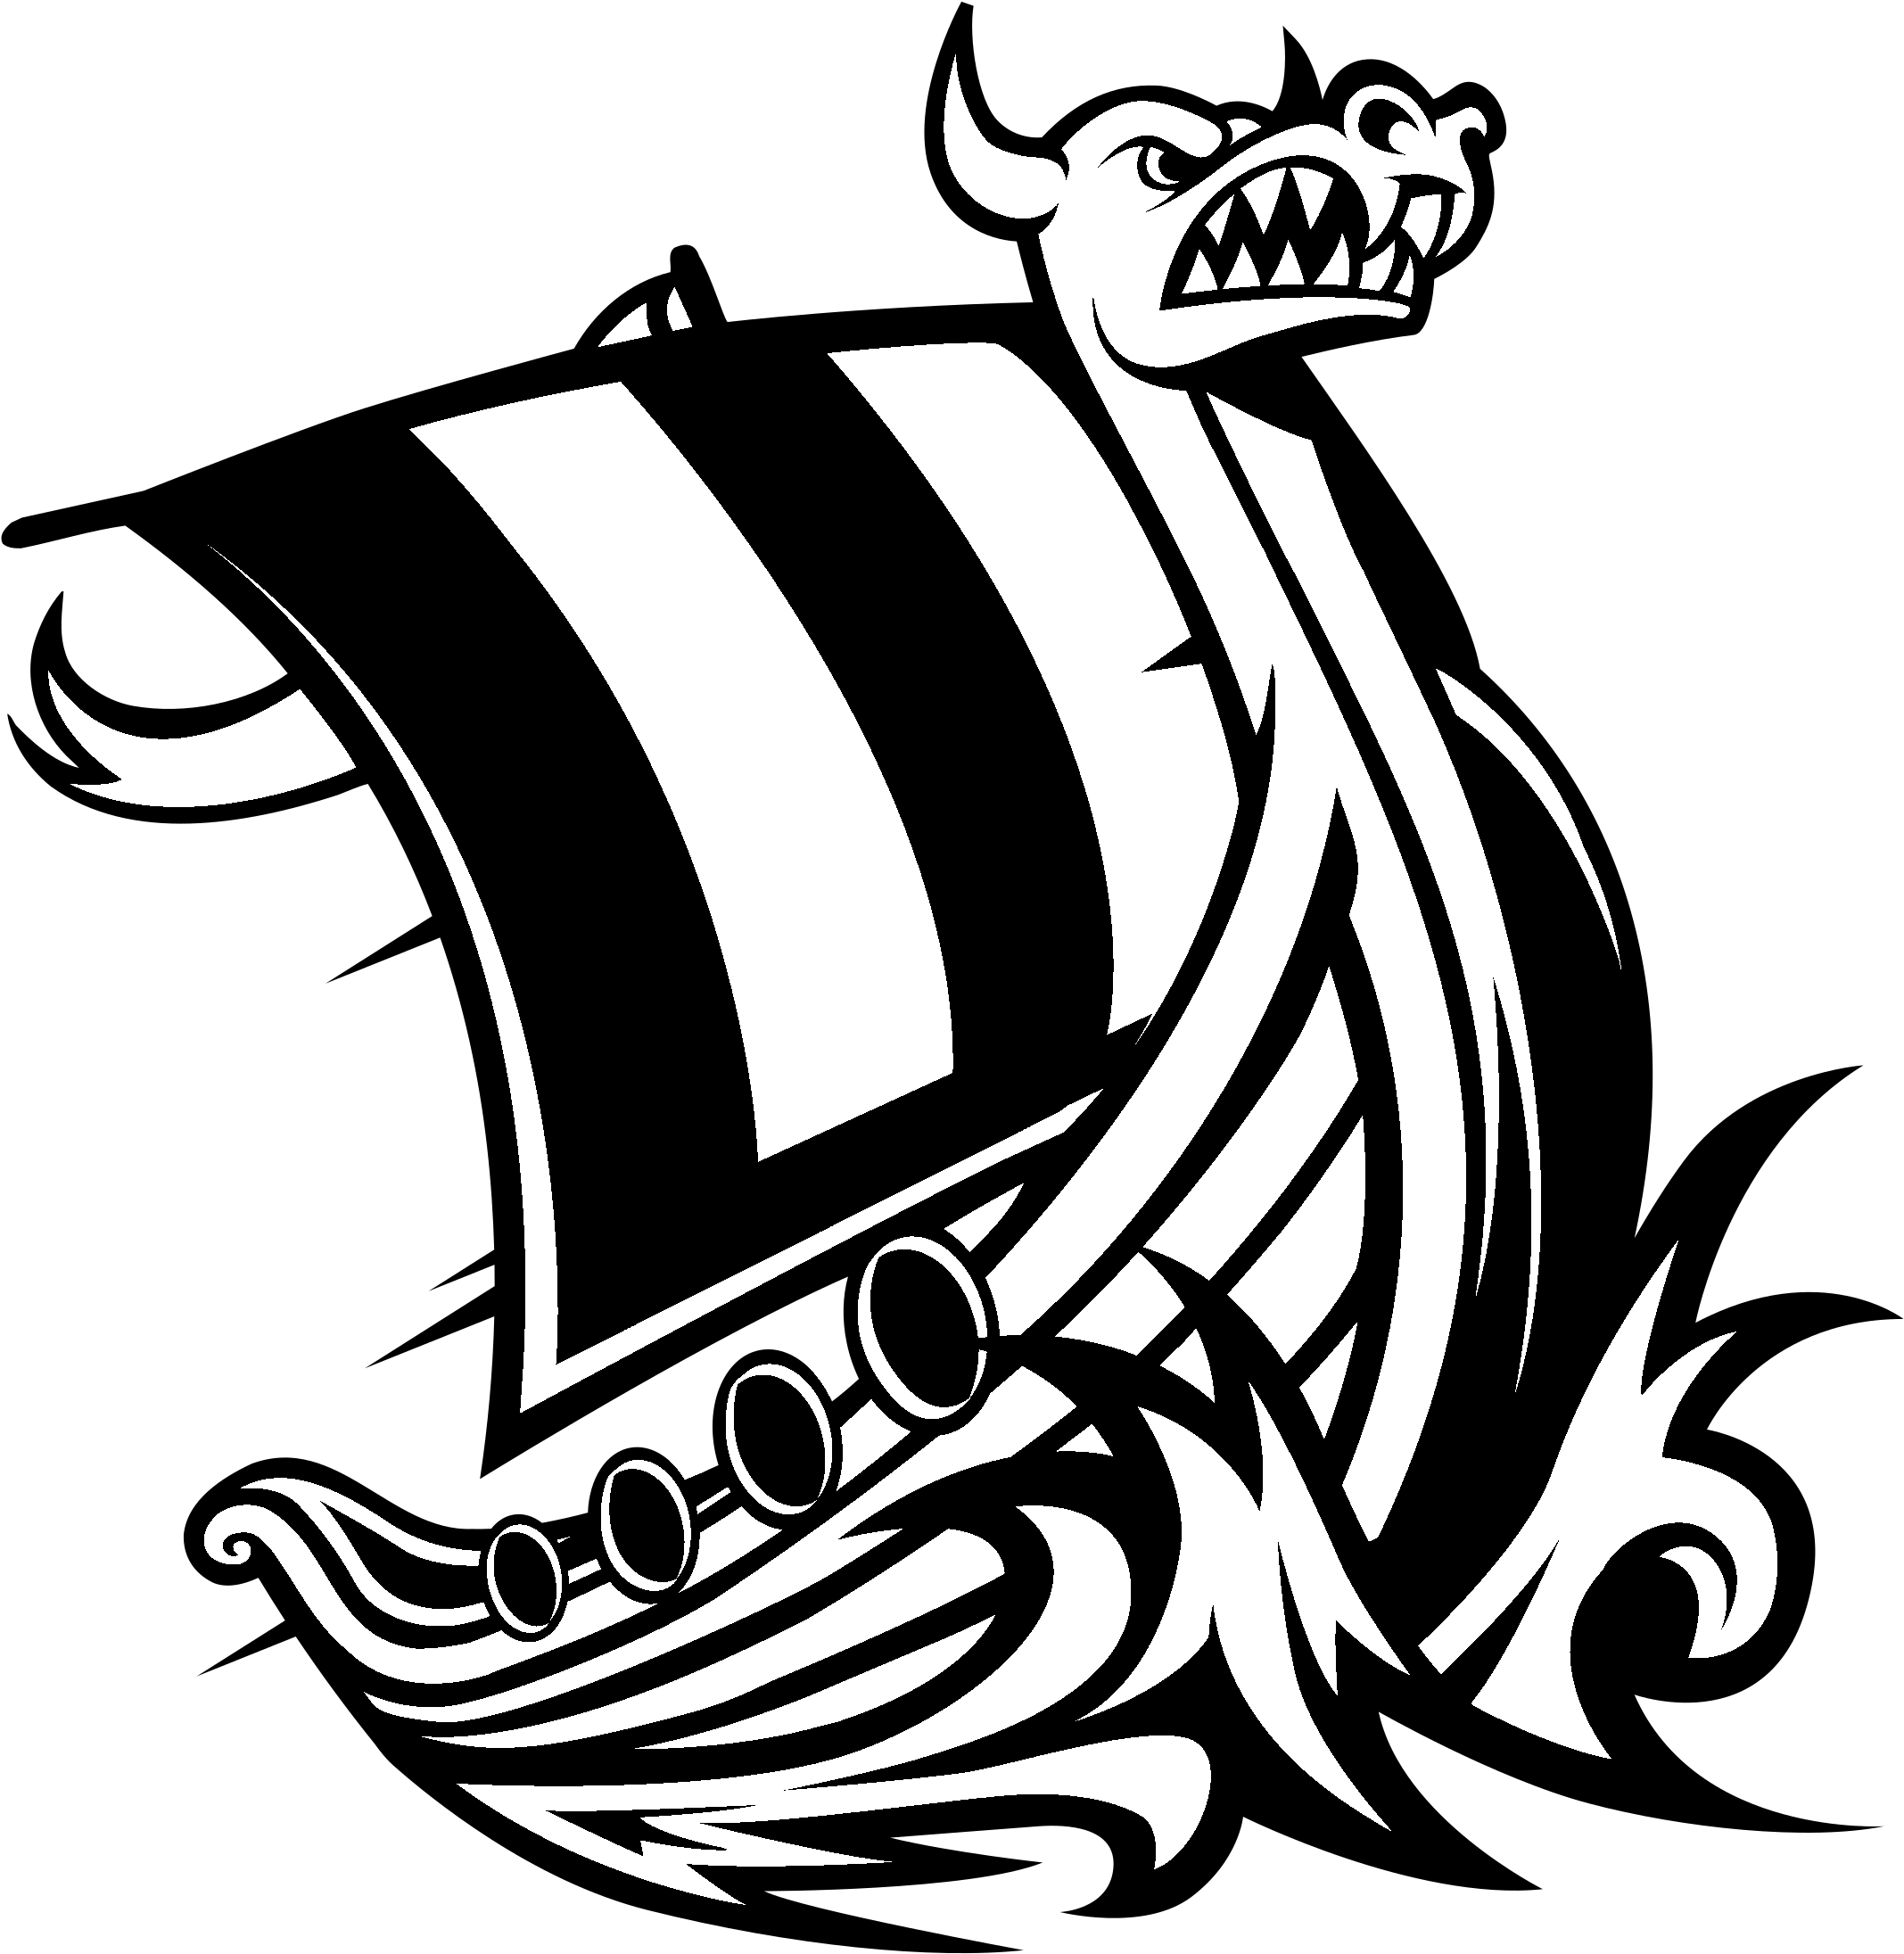 Download Wwu Vikings Logo Black And White PNG Image with No Background